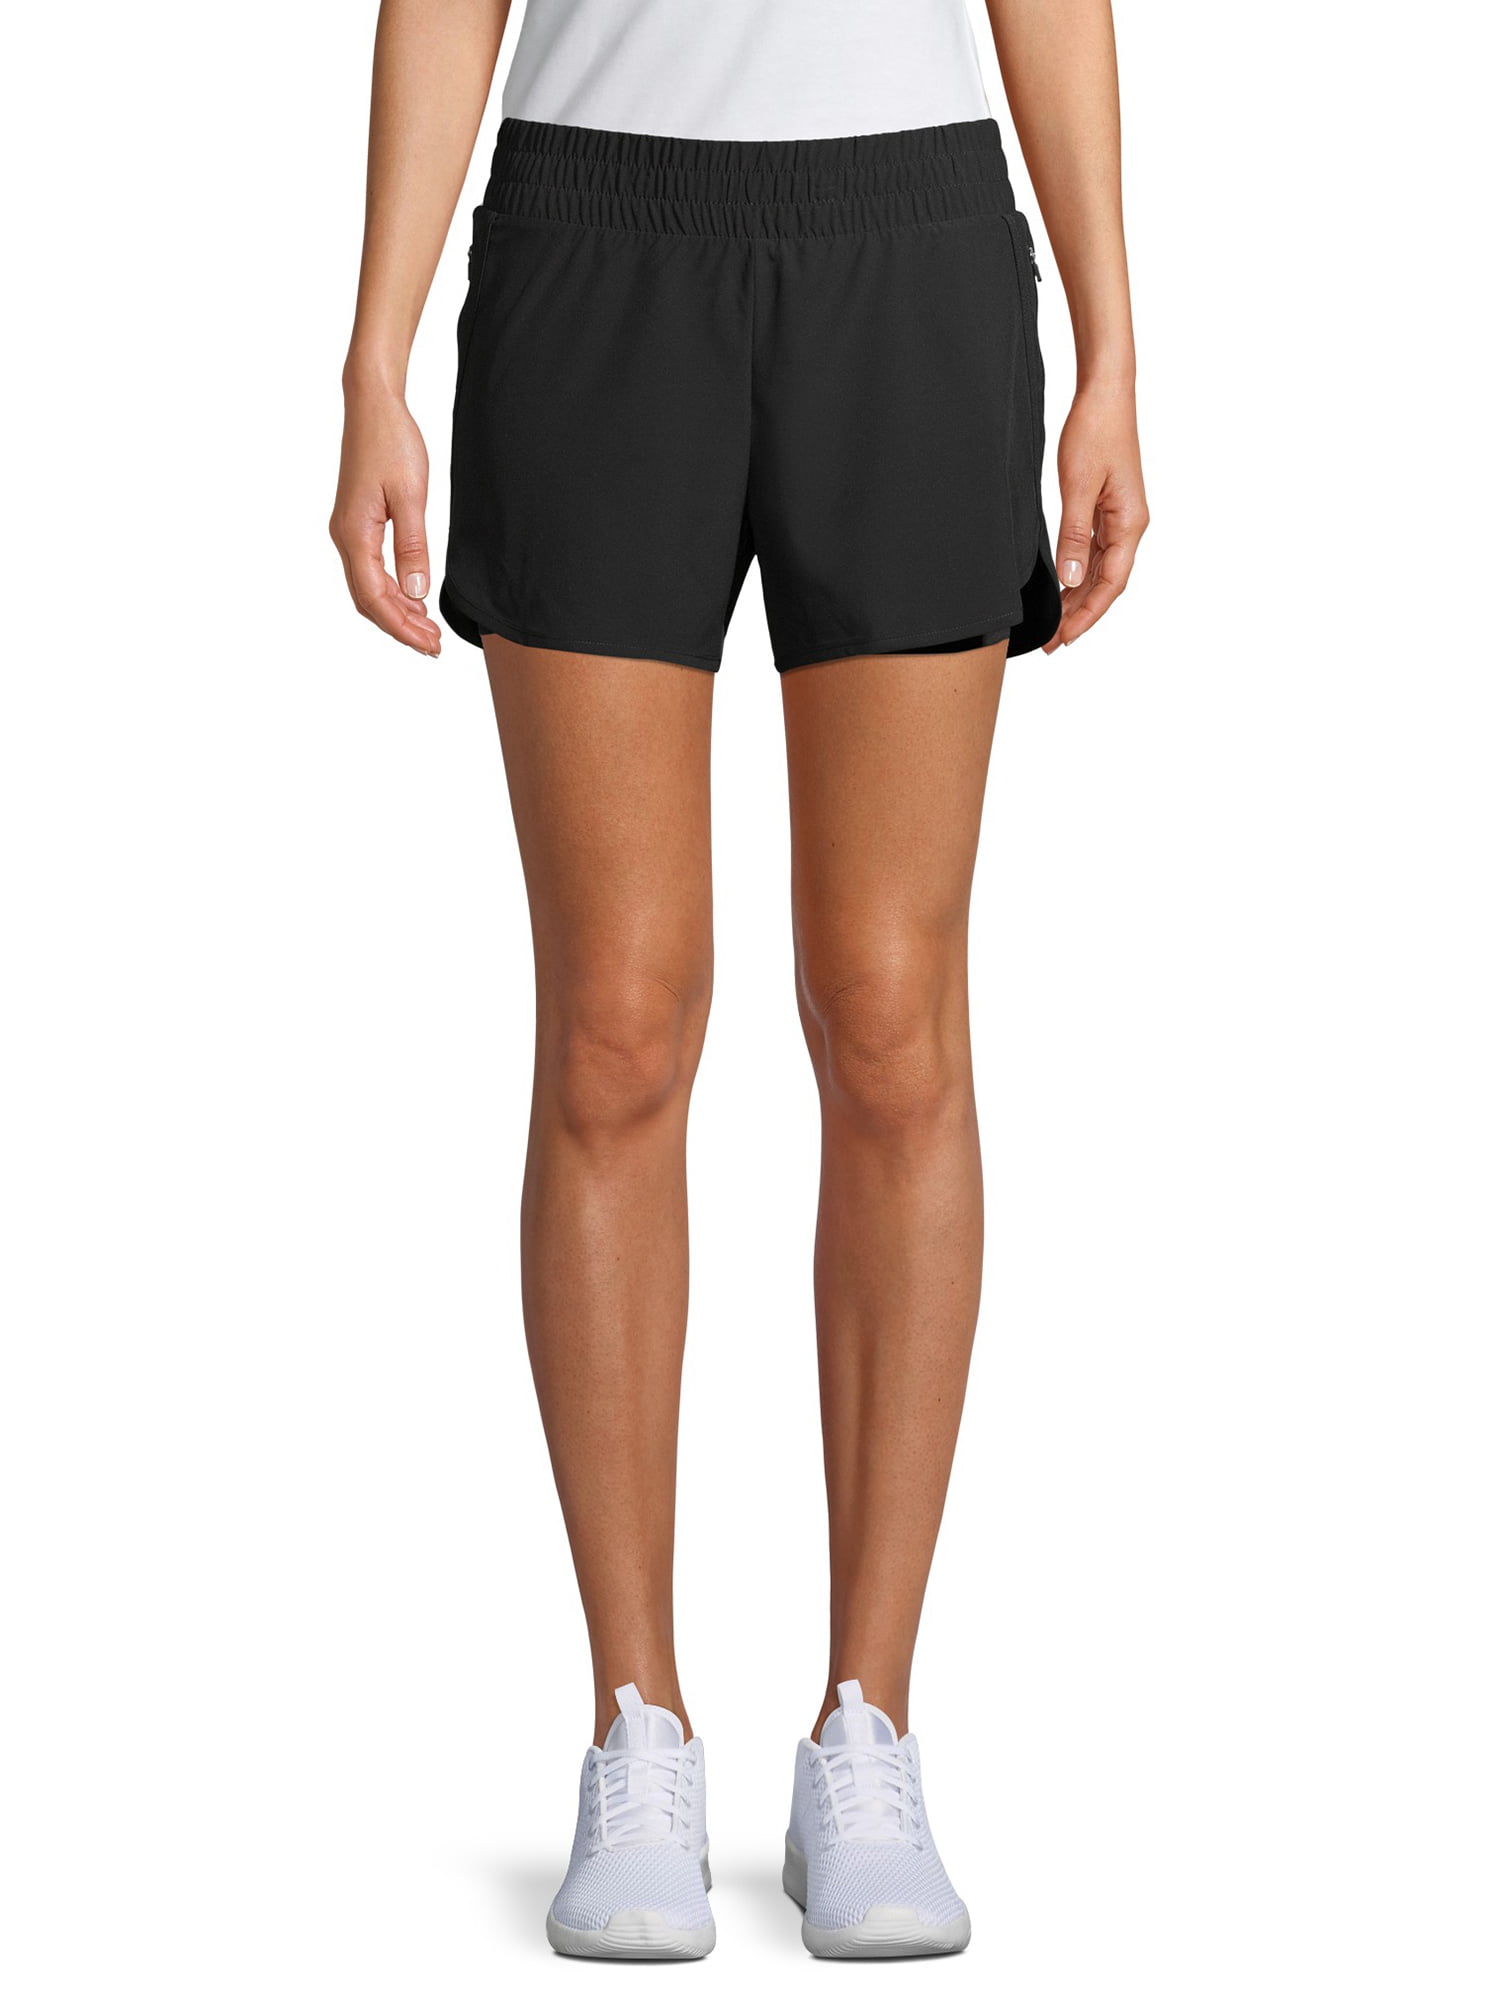 Athletic Works Women's Active Performance Running Shorts with Bike Liner 